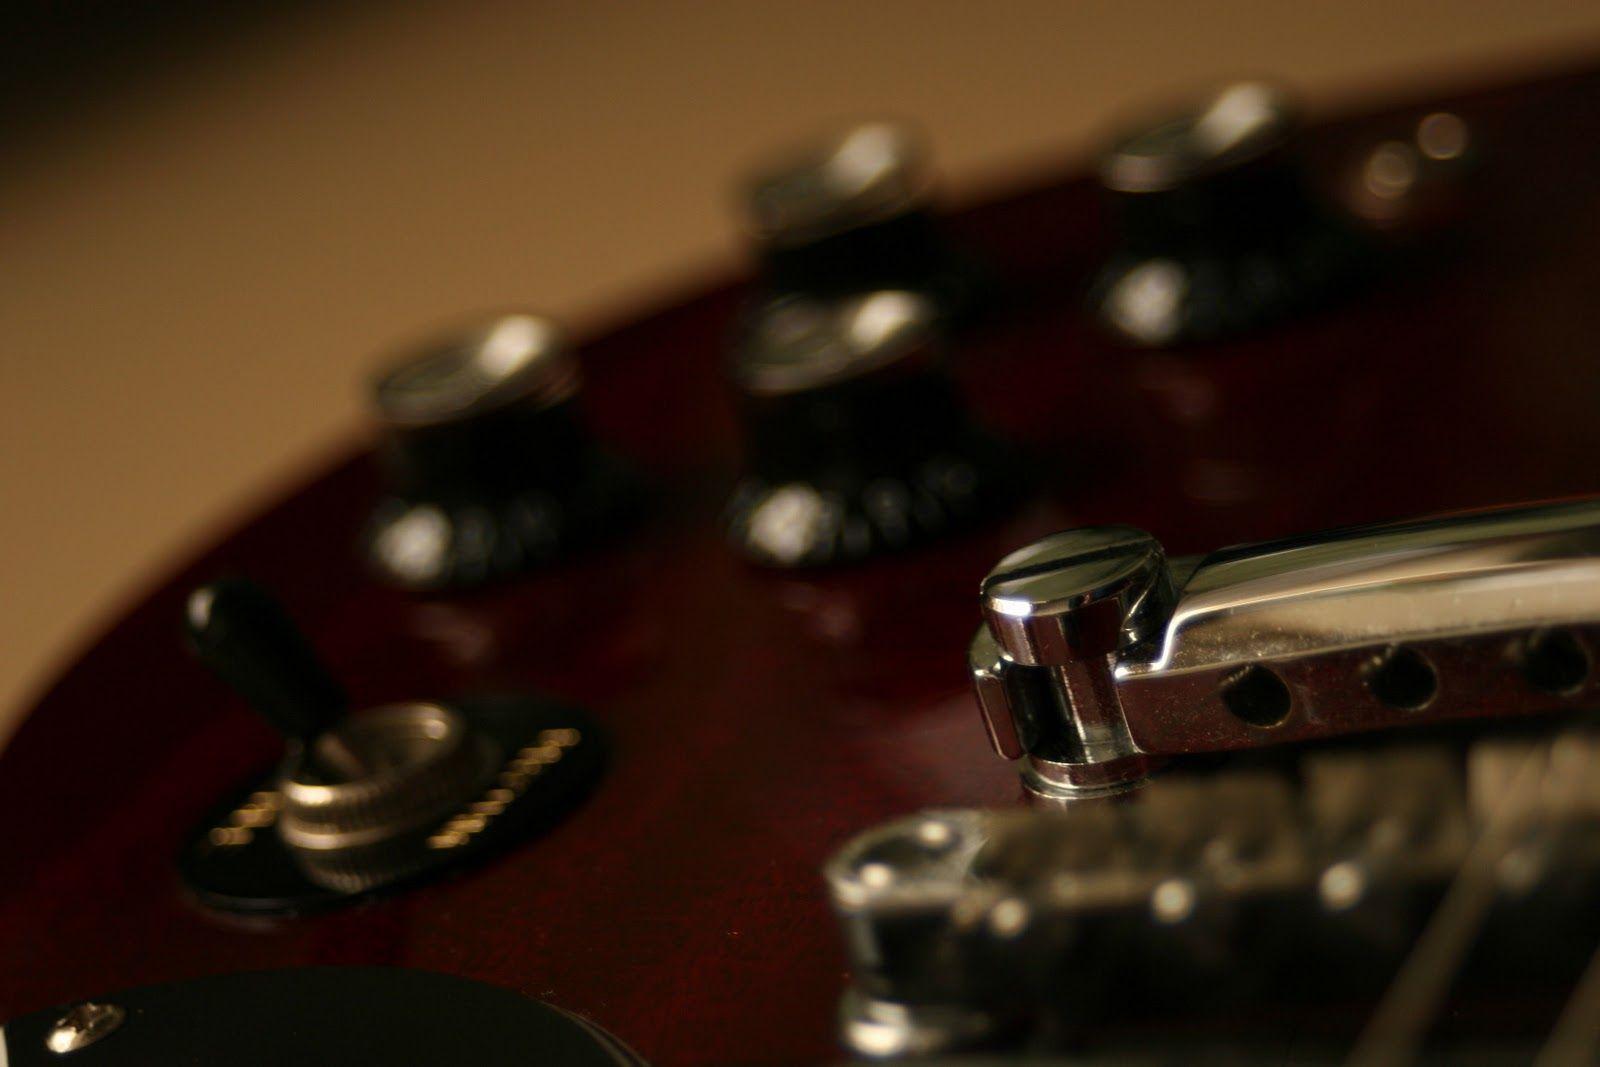 Wallpaper Gibson Sg downloads apk android